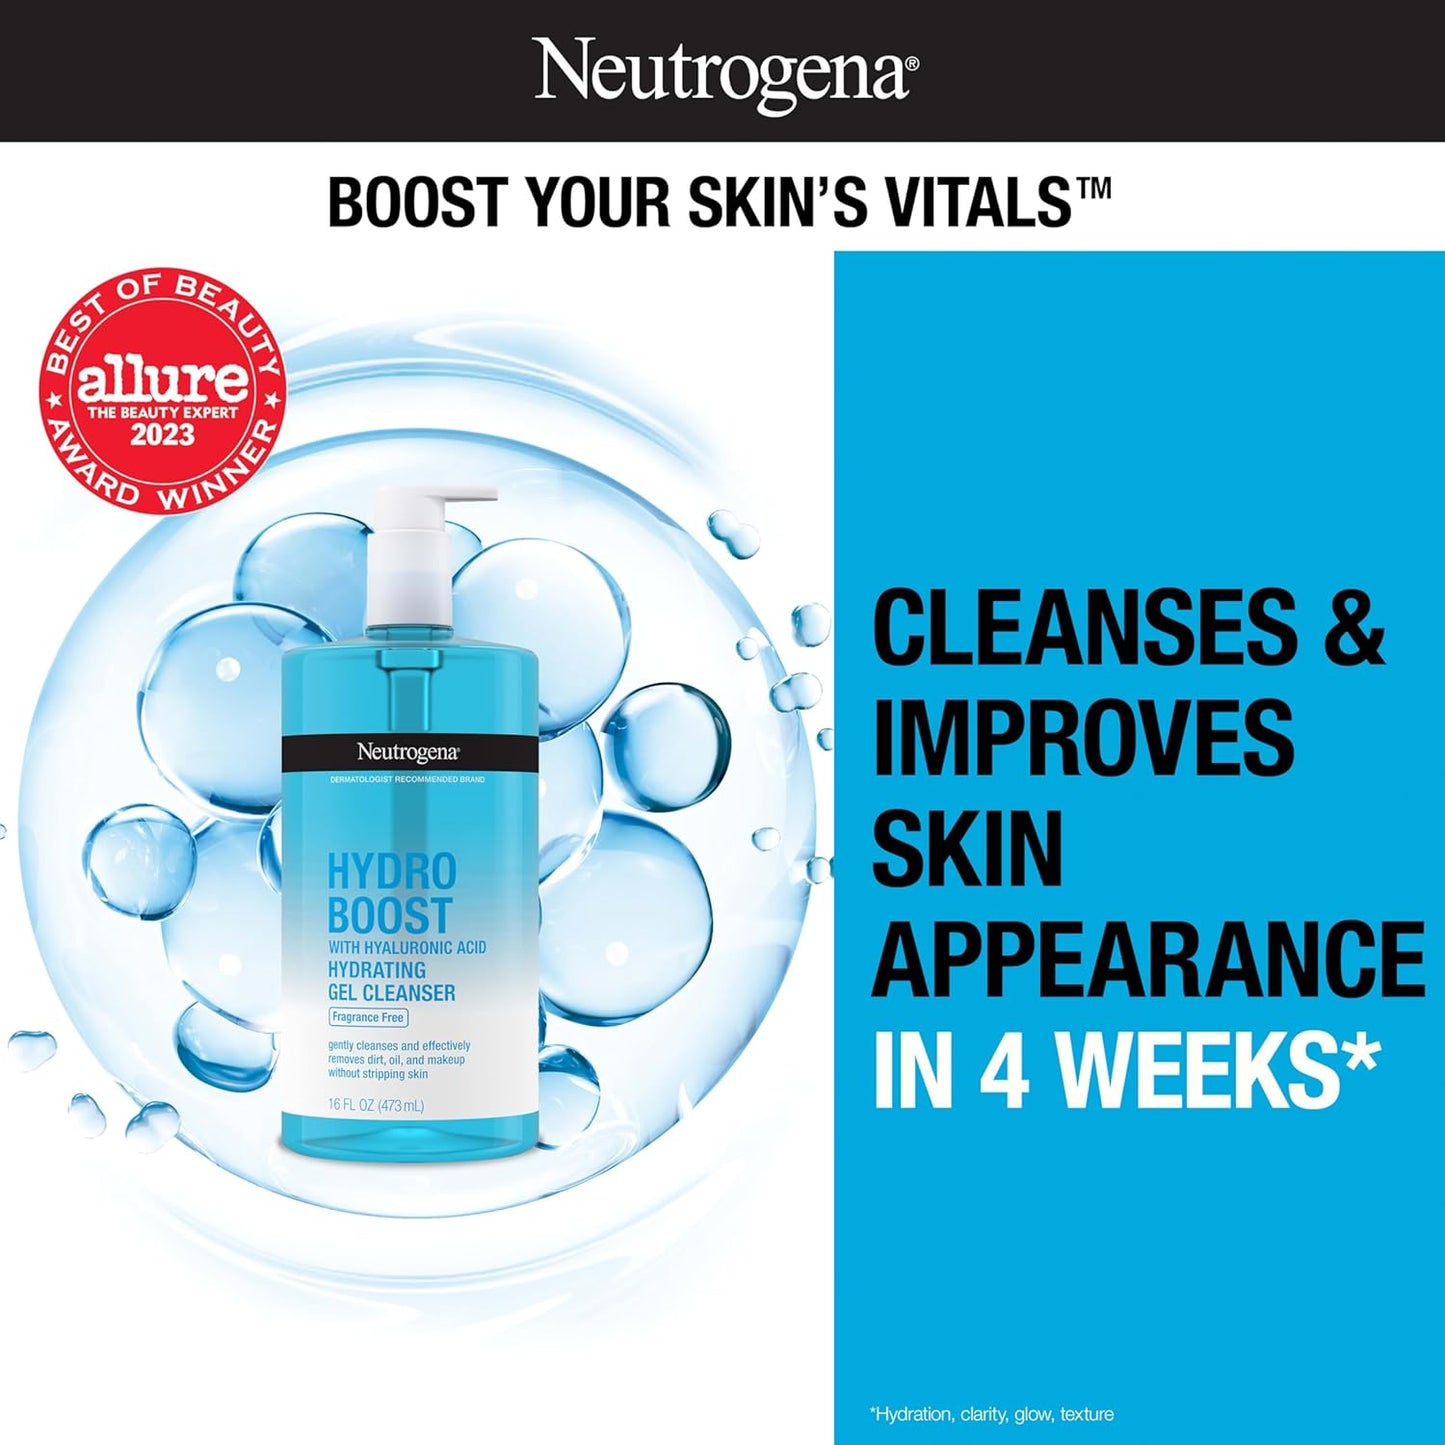 Neutrogena Hydro Boost Fragrance-Free Hydrating Facial Gel Cleanser with Hyaluronic Acid, Daily Foaming Face Wash Gel & Makeup Remover, Lightweigh